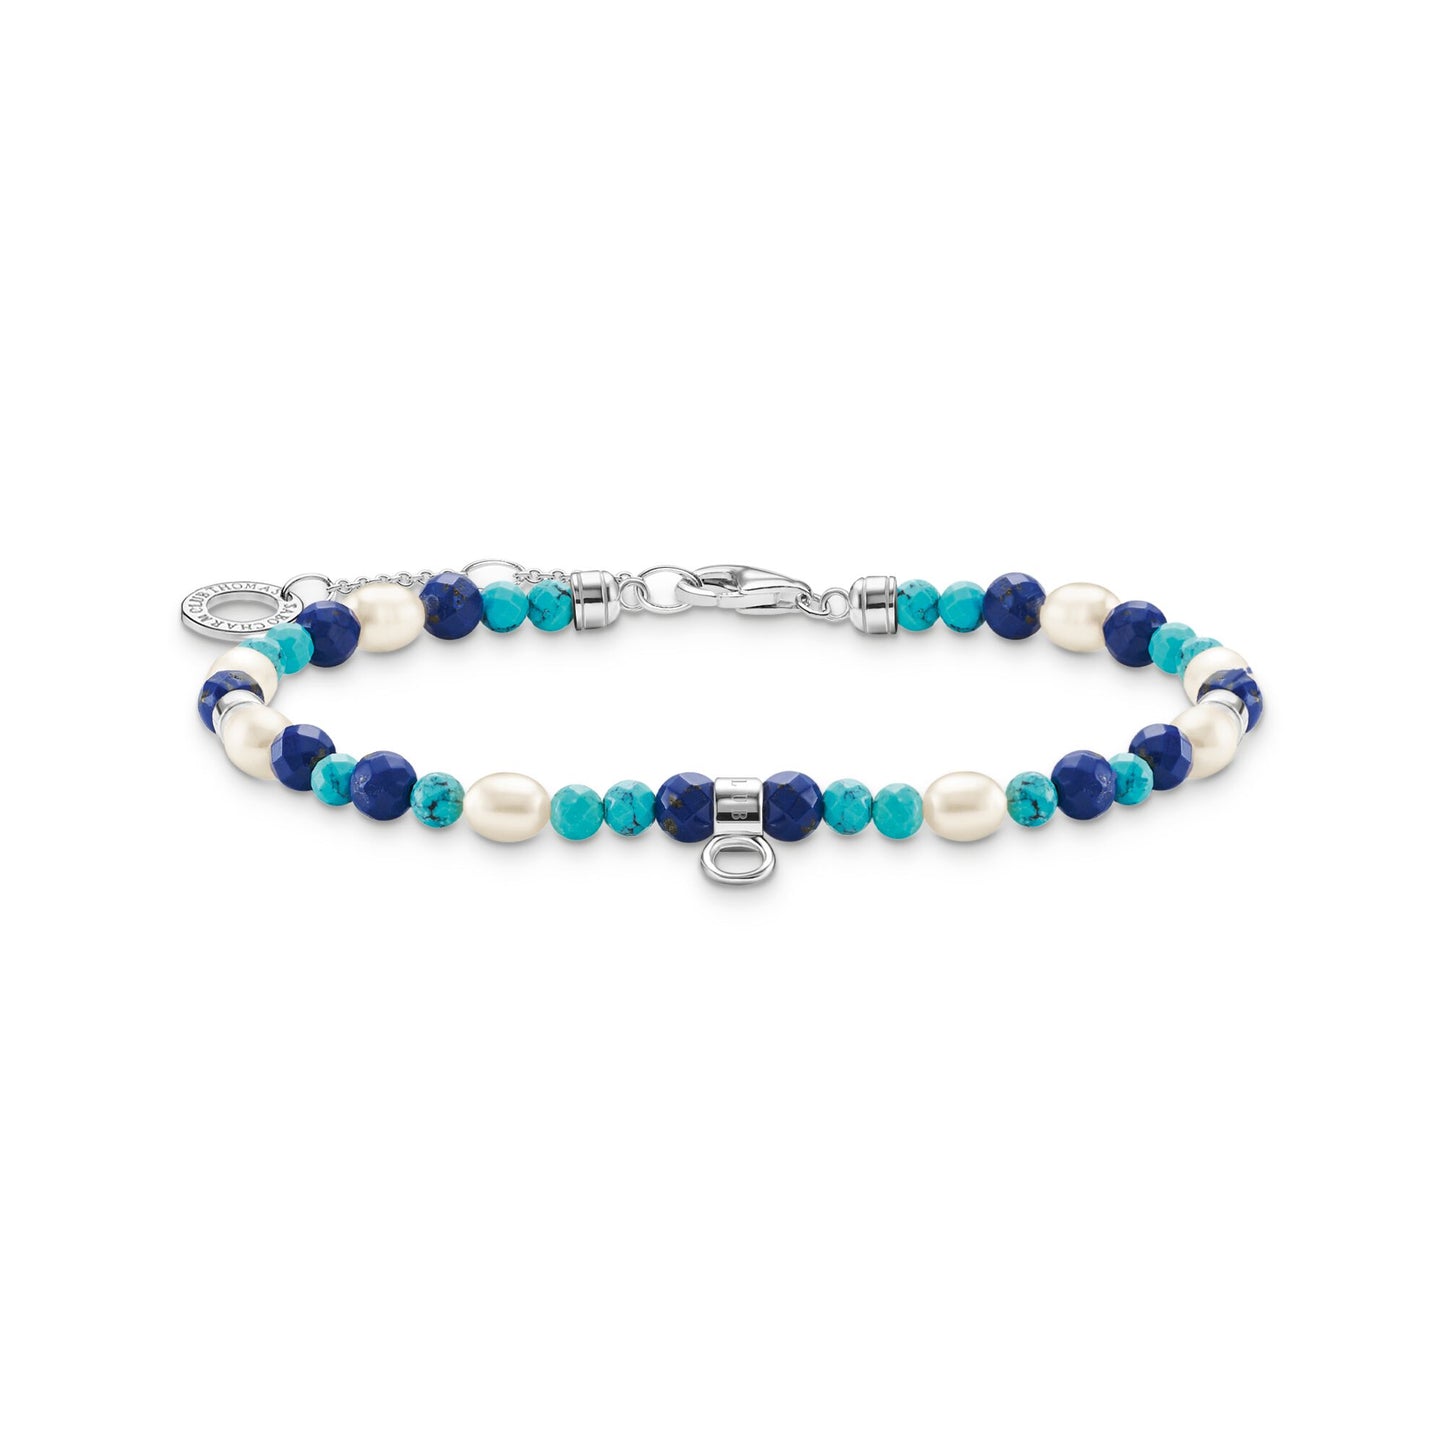 Thomas Sabo Bracelet With Blue Stones And Pearls A2064-775-7-L19V